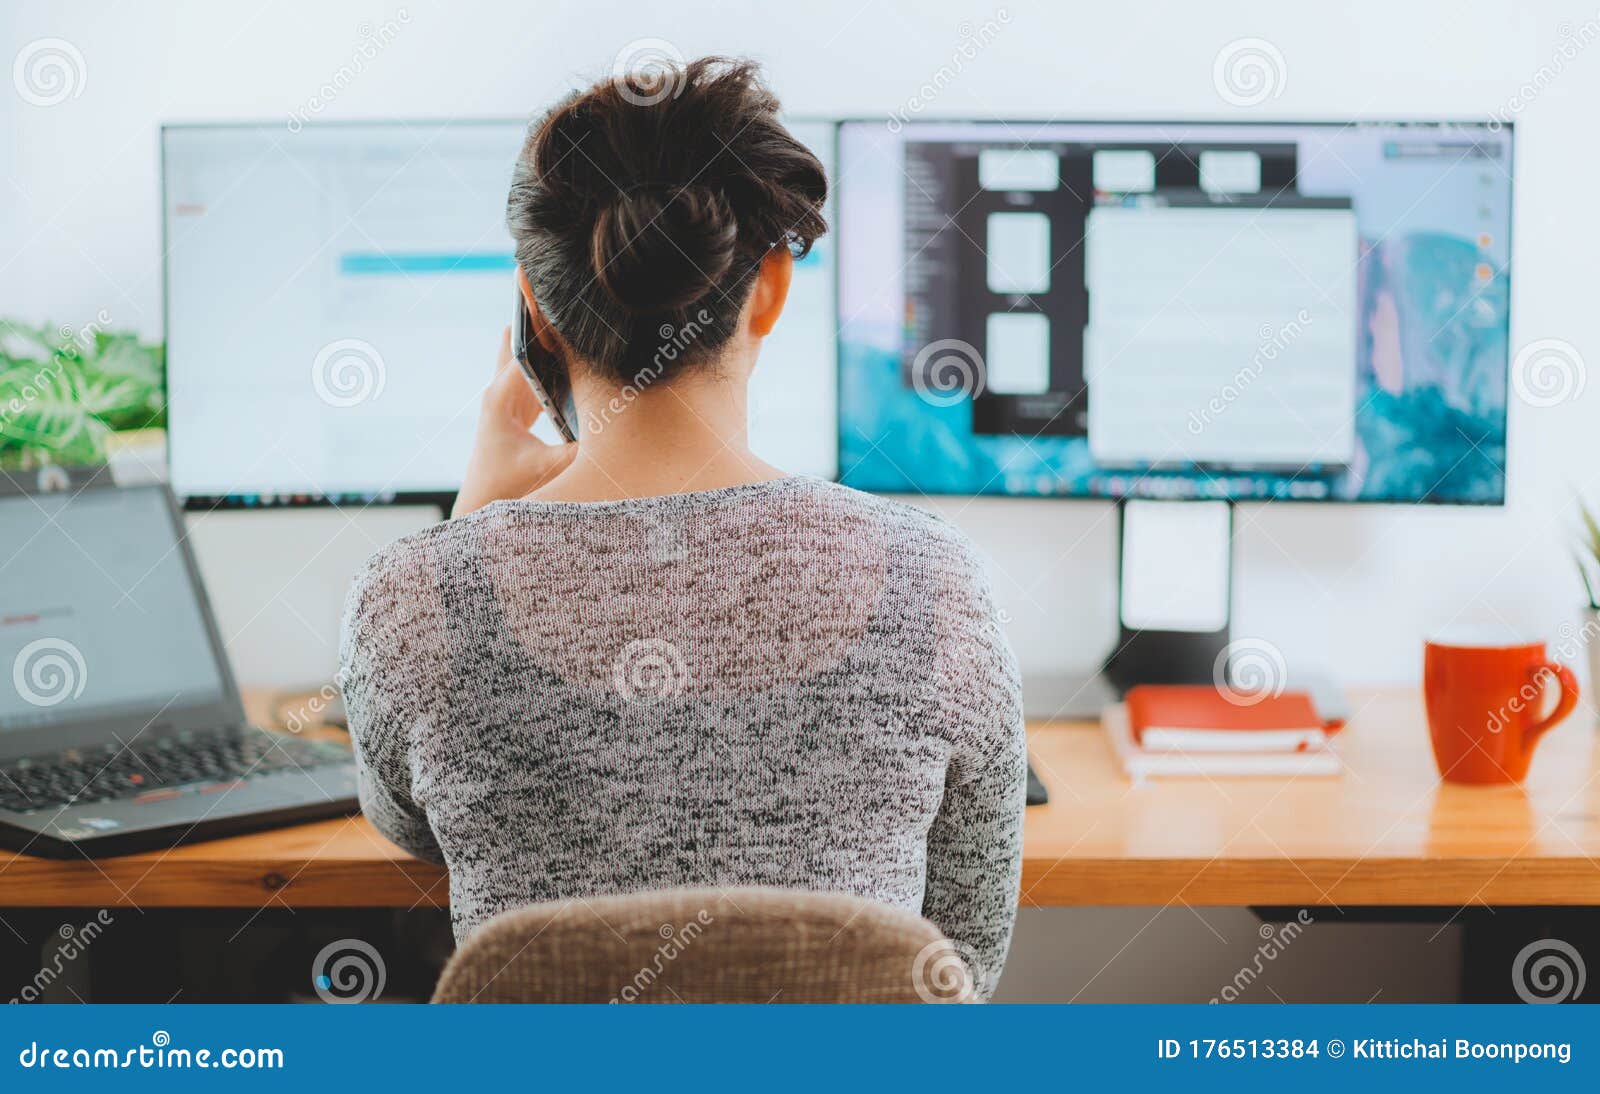 woman working at home. office worker on quarantine. home working to avoid virus disease. freelancer or remote worker concept